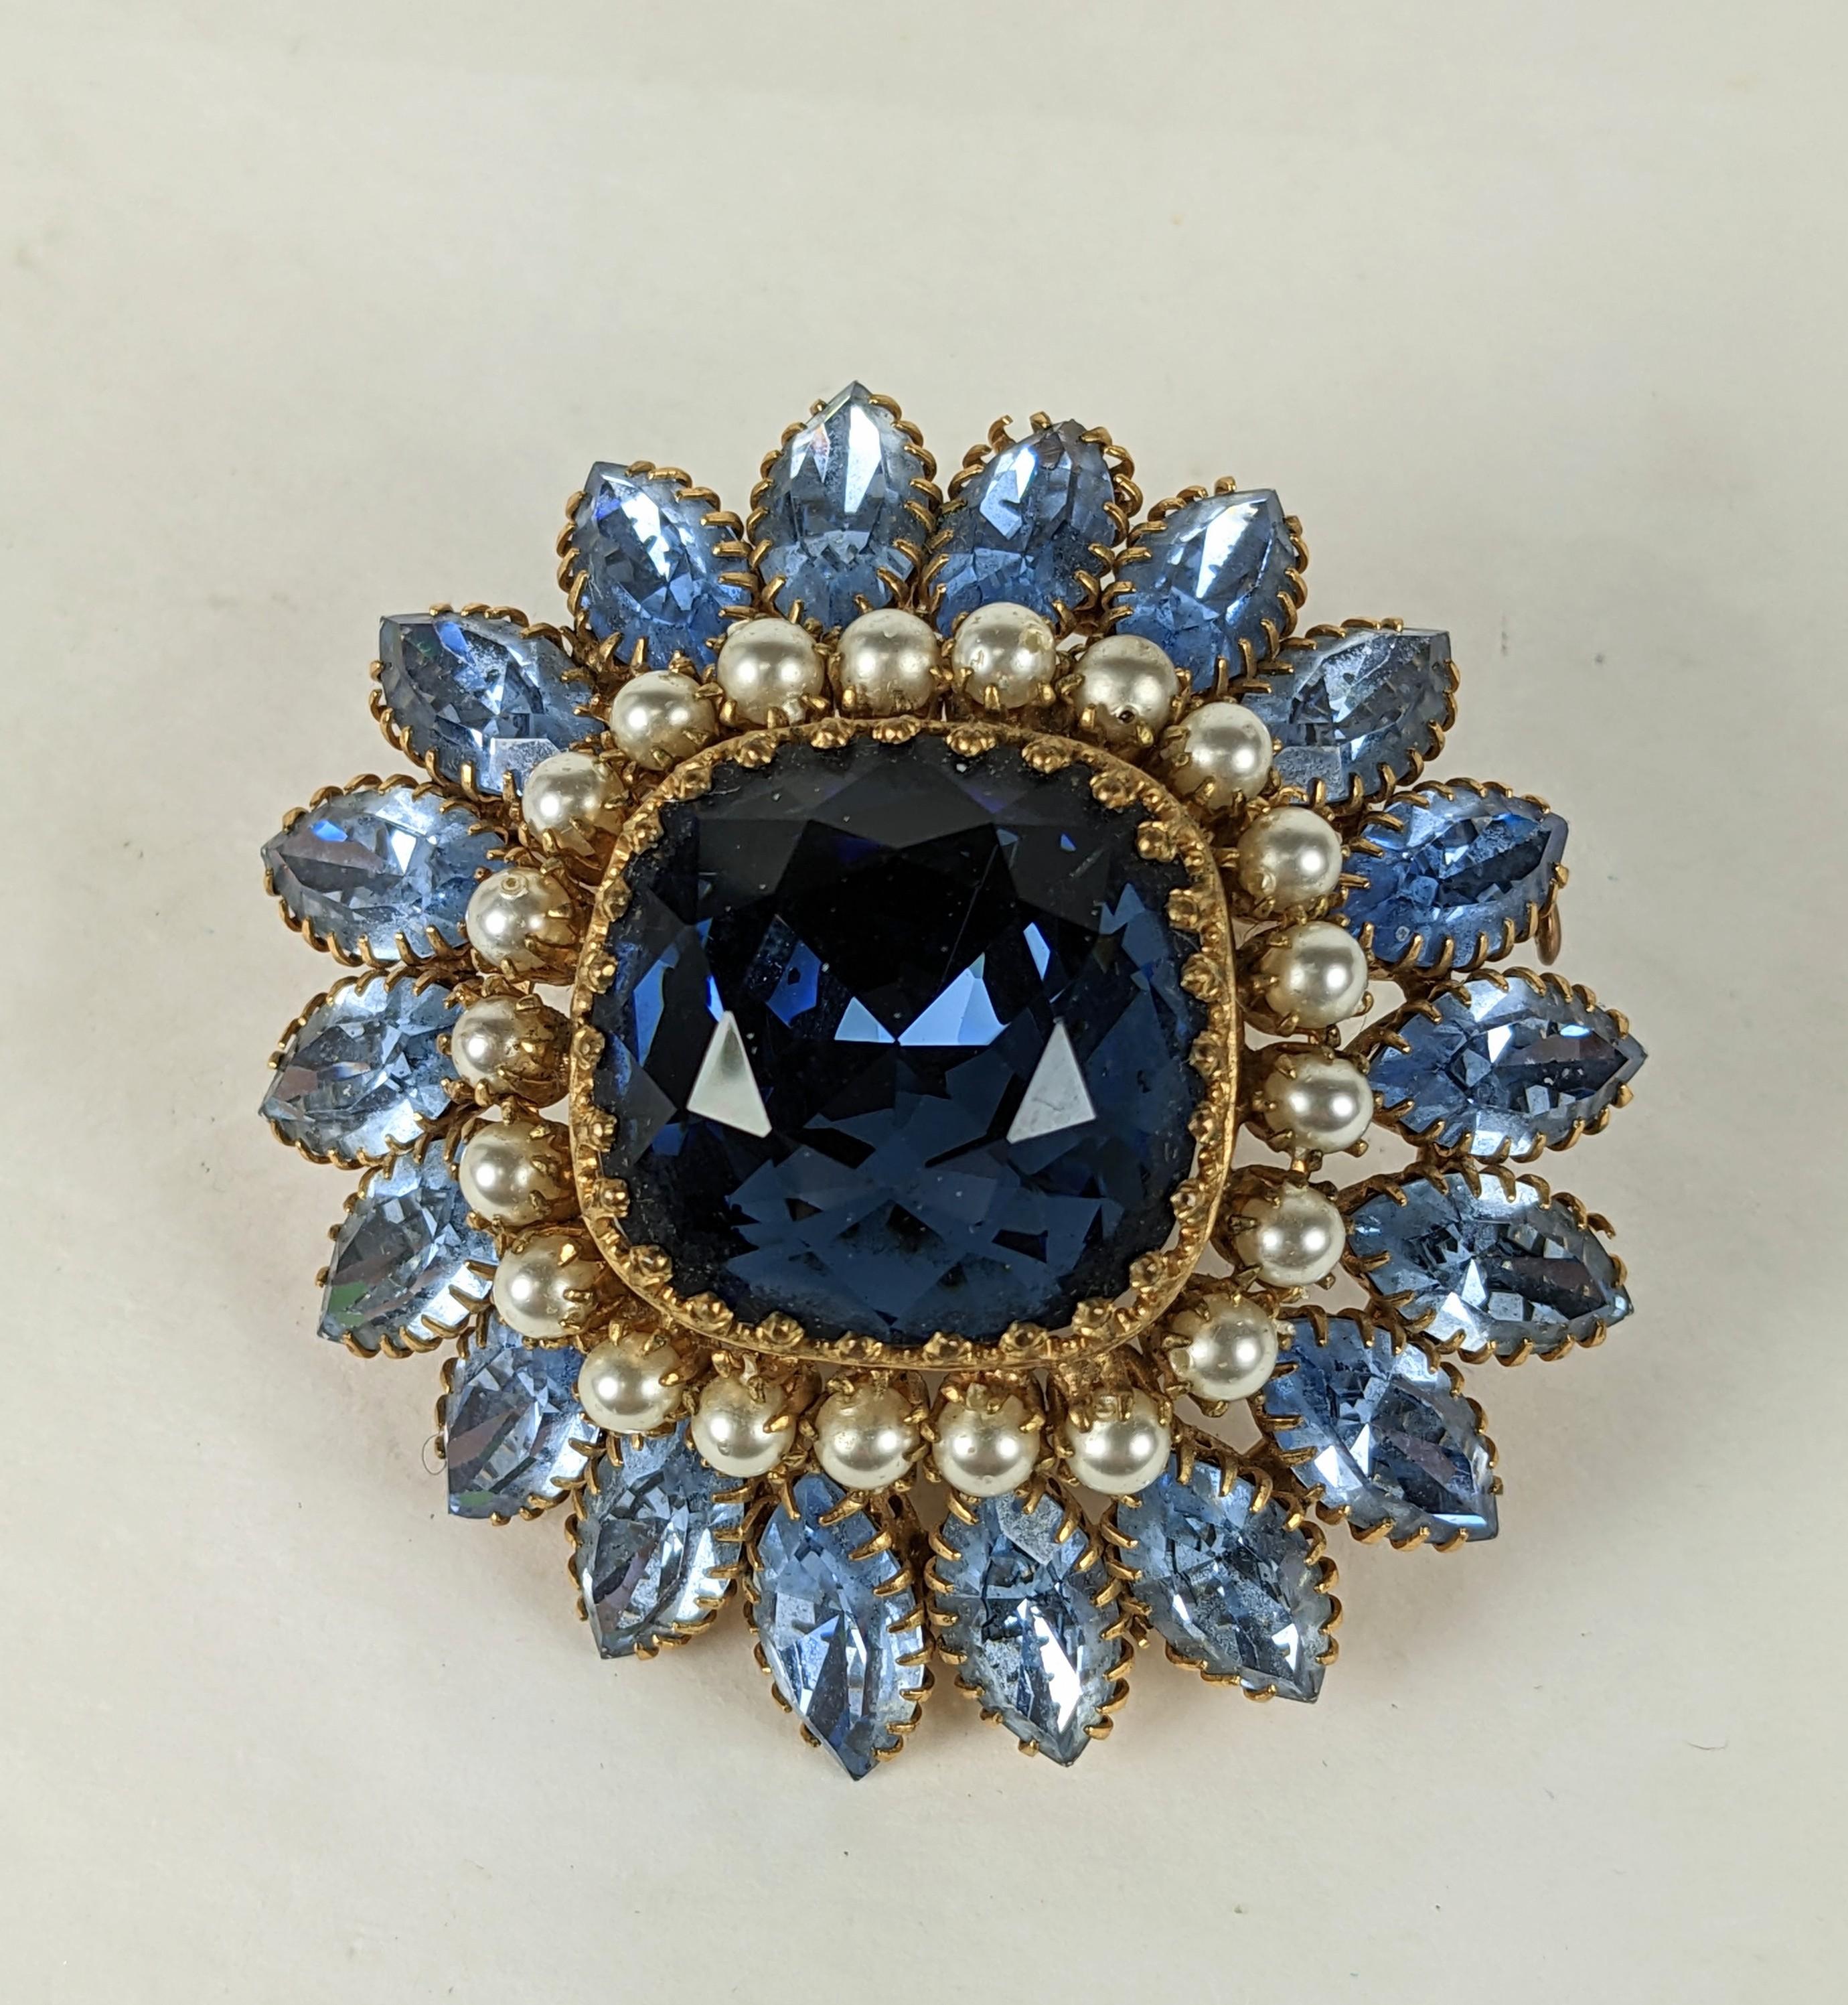 Countess Cis brooch of cushion cut faux sapphire, pale aquamarine faceted marquises and faux pearls. Set in rich gilt plate with signature Countess Cis multi prong eyelash settings.
Unsigned. Excellent Condition, L 2 2/8